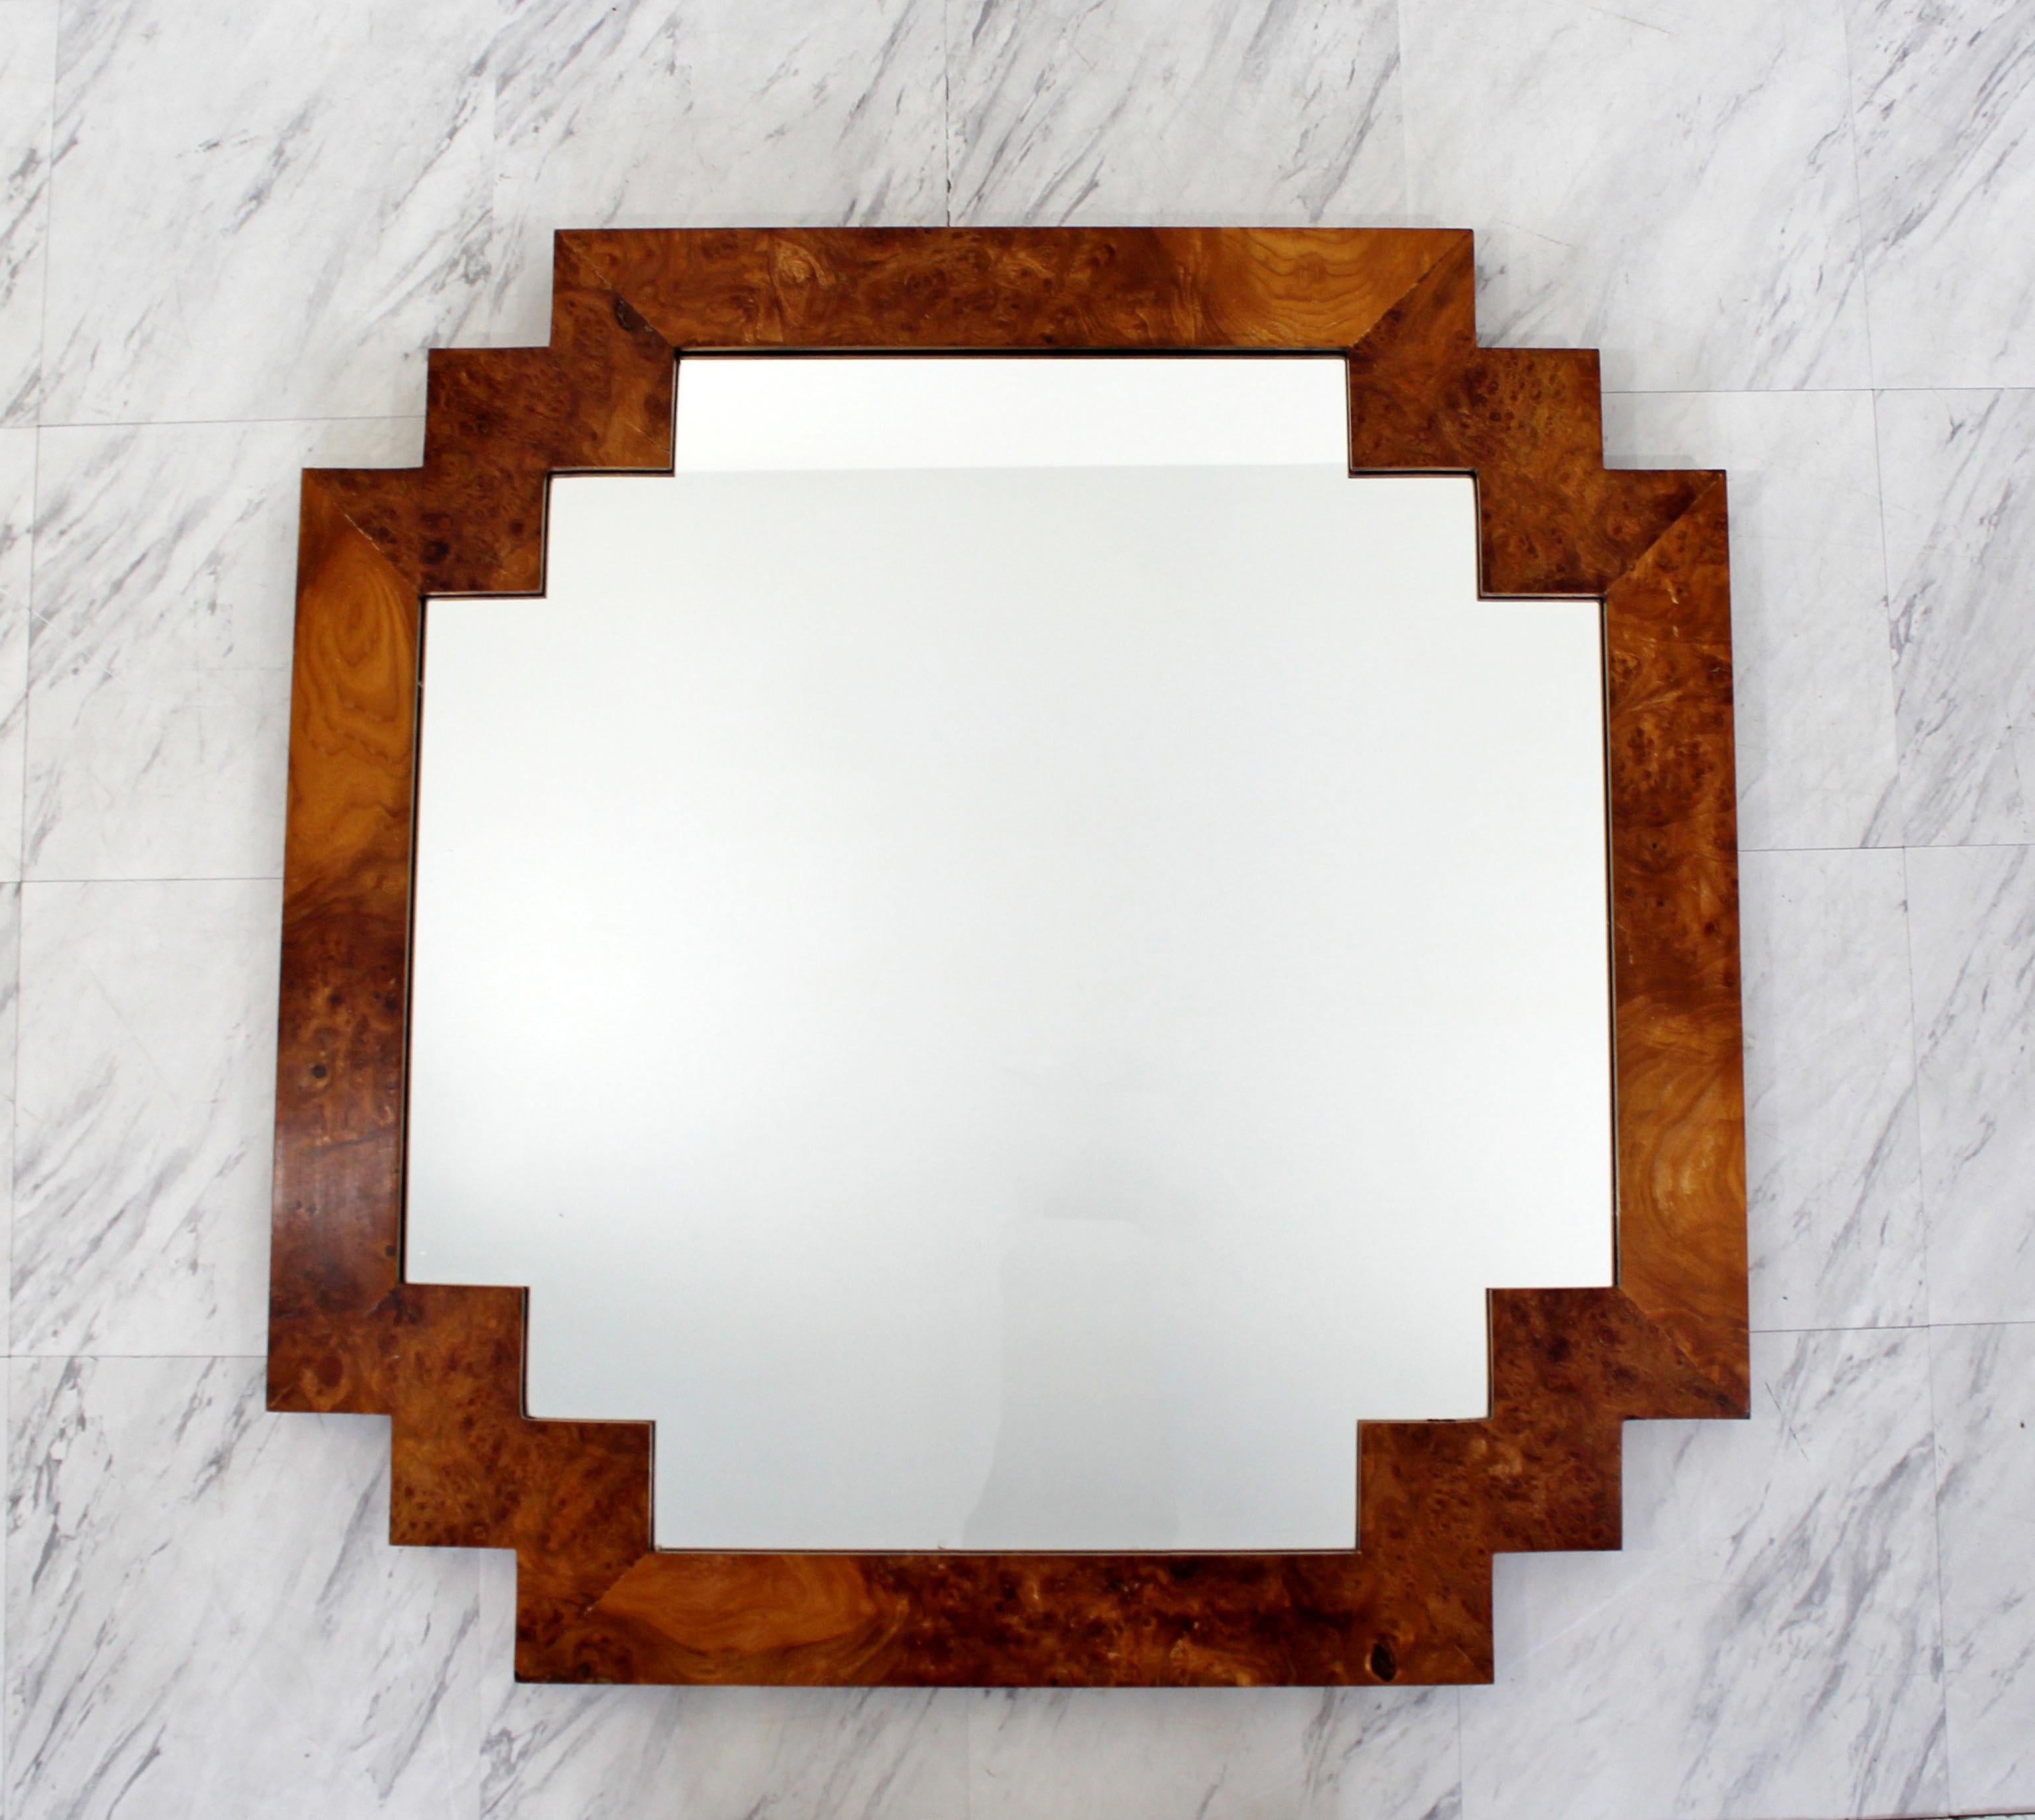 For your consideration is a fabulous, hanging wall mirror, made of burl wood, by La Barge, circa 1970s. In excellent condition. The dimensions are 36